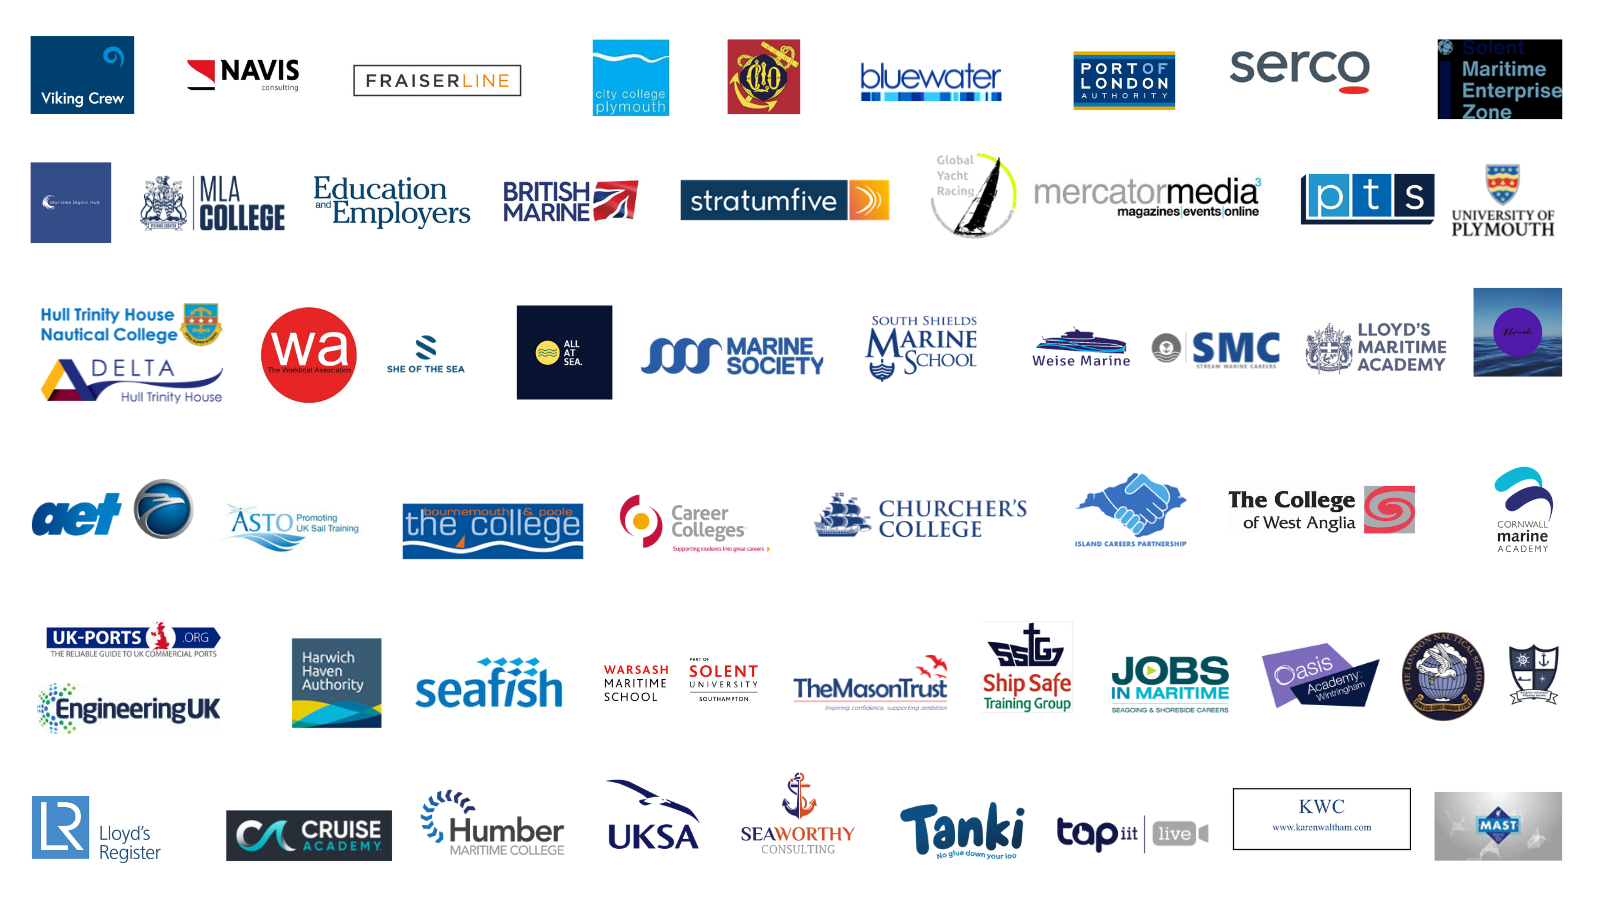 Maritime Careers Campaign Partners Page 31/03/22